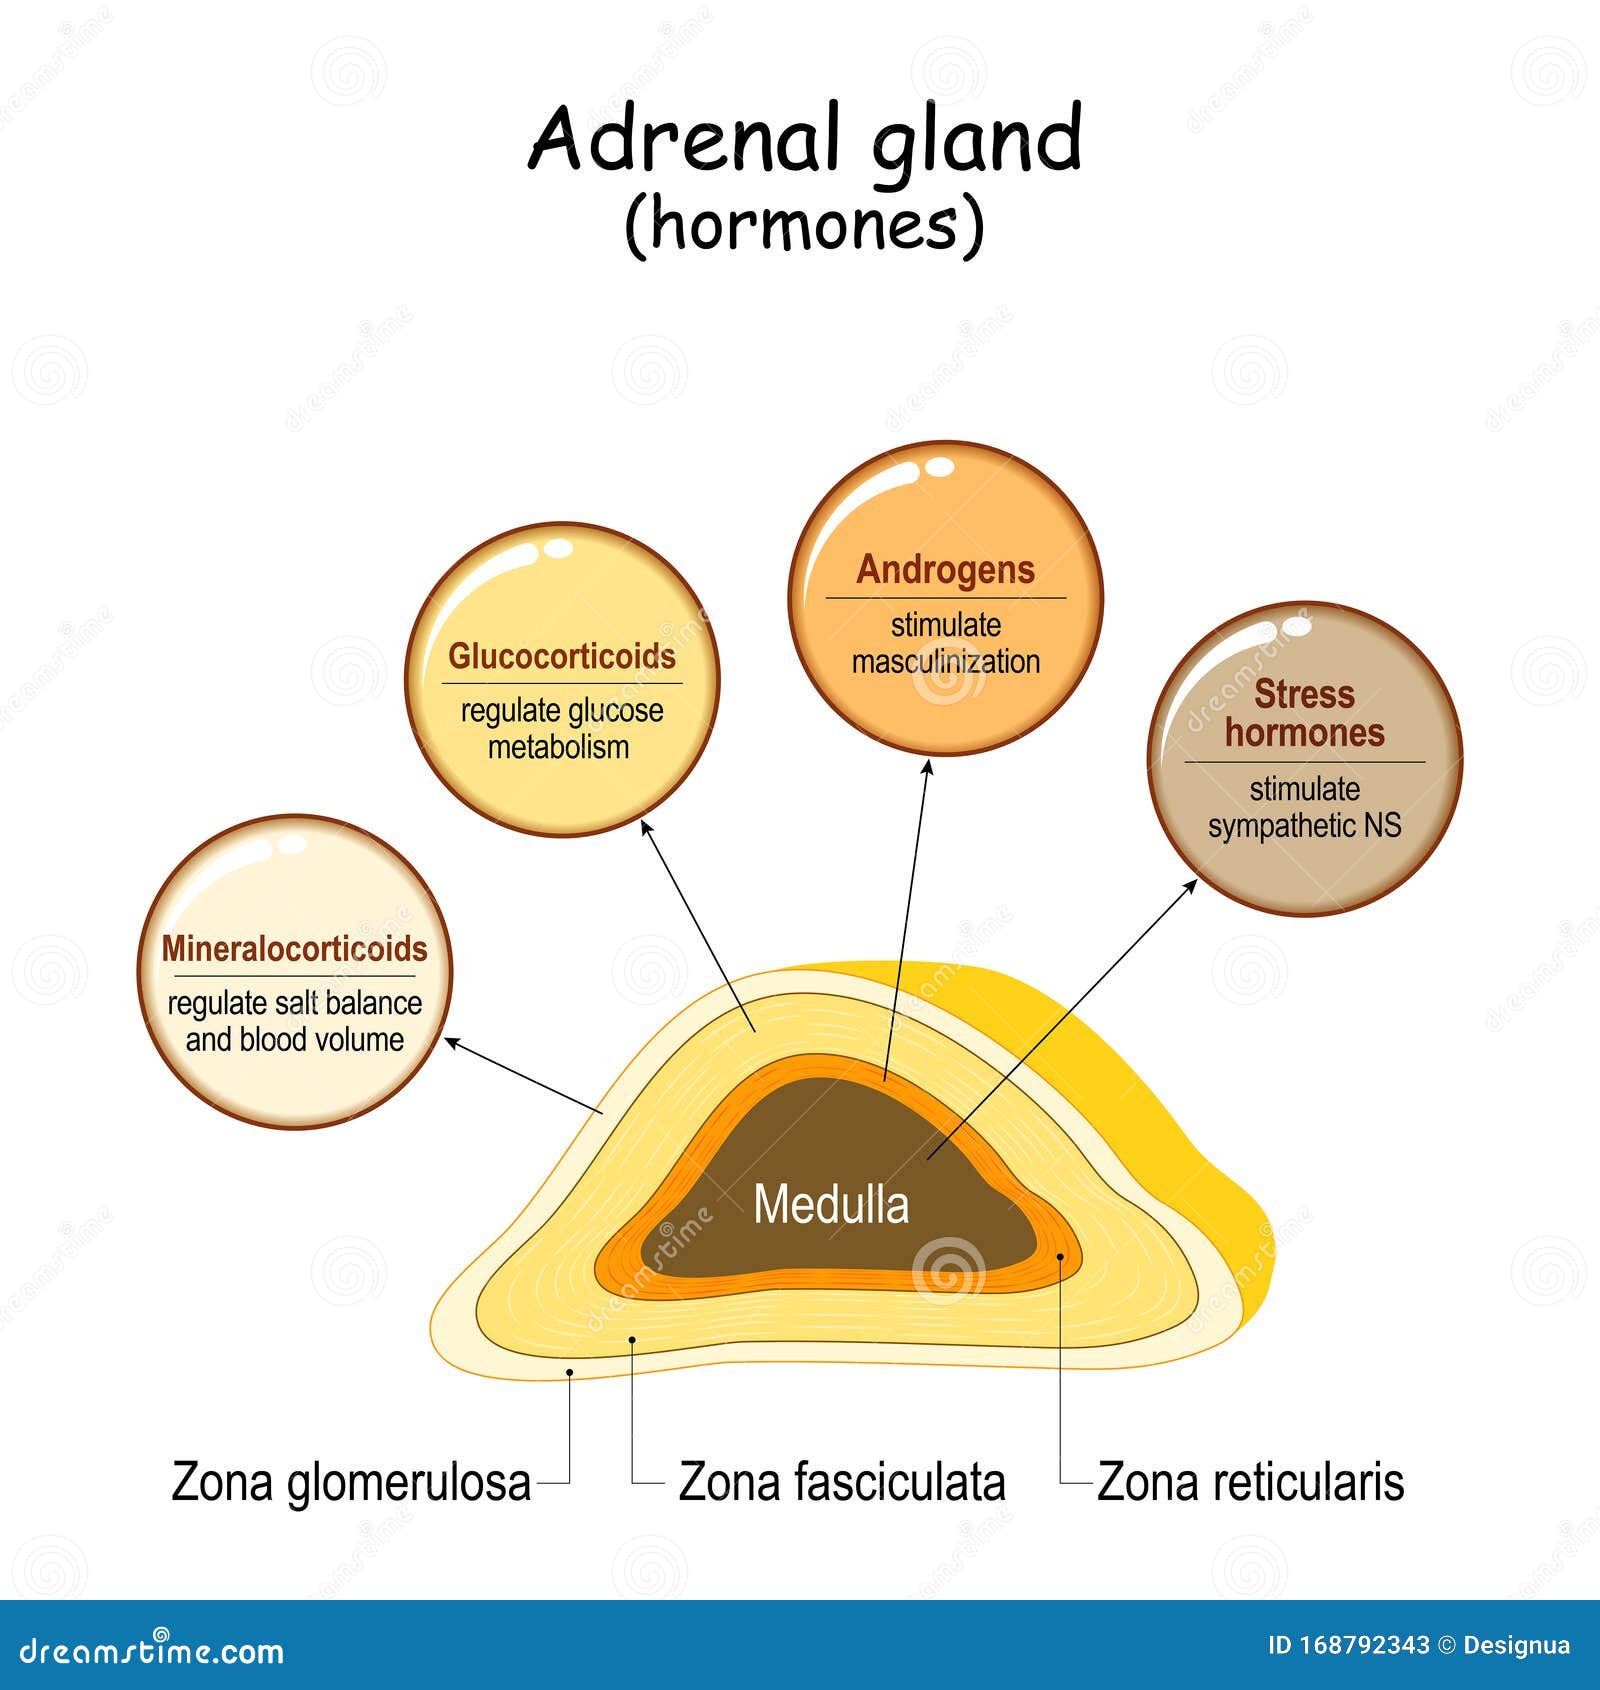 adrenal gland produces what hormone